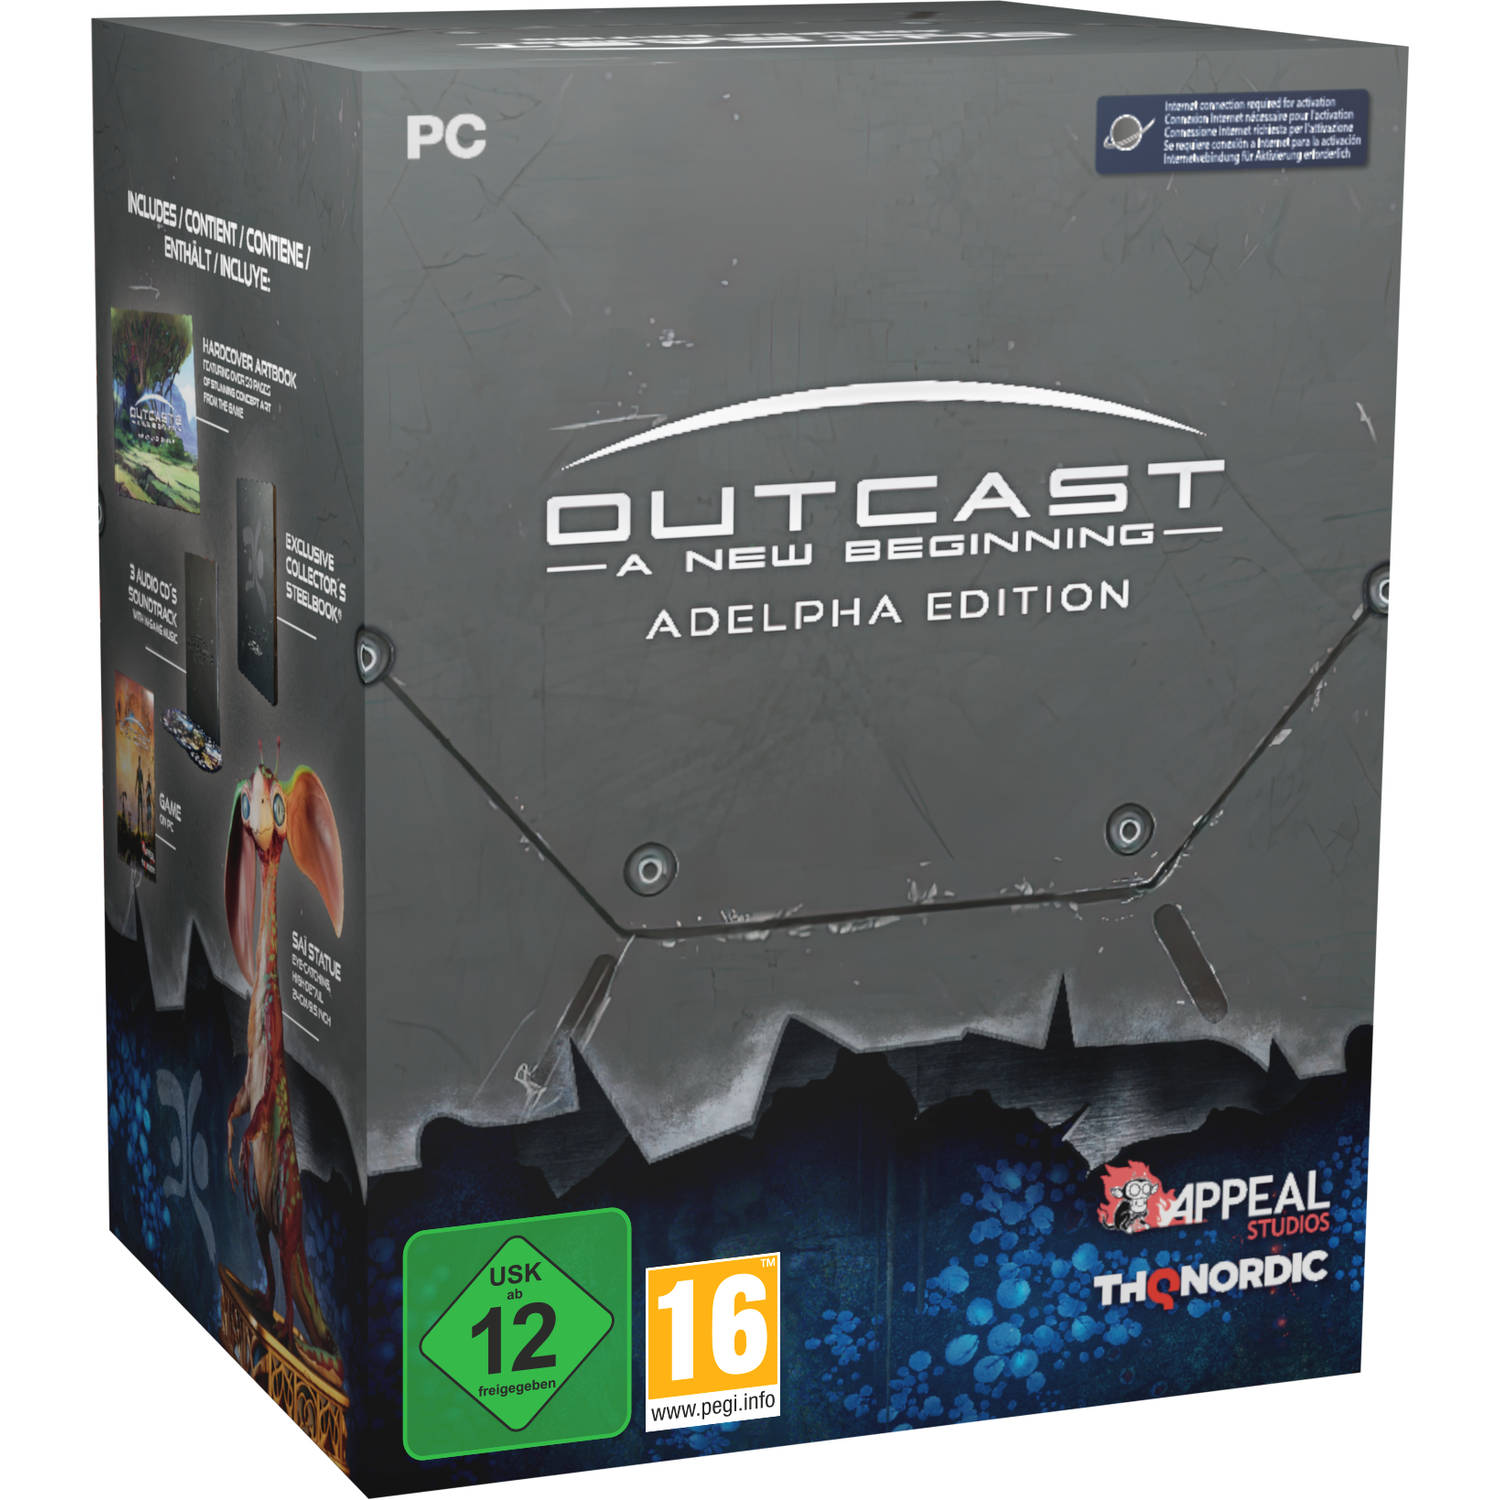 Outcast - A New Beginning Adelpha Edition - PC